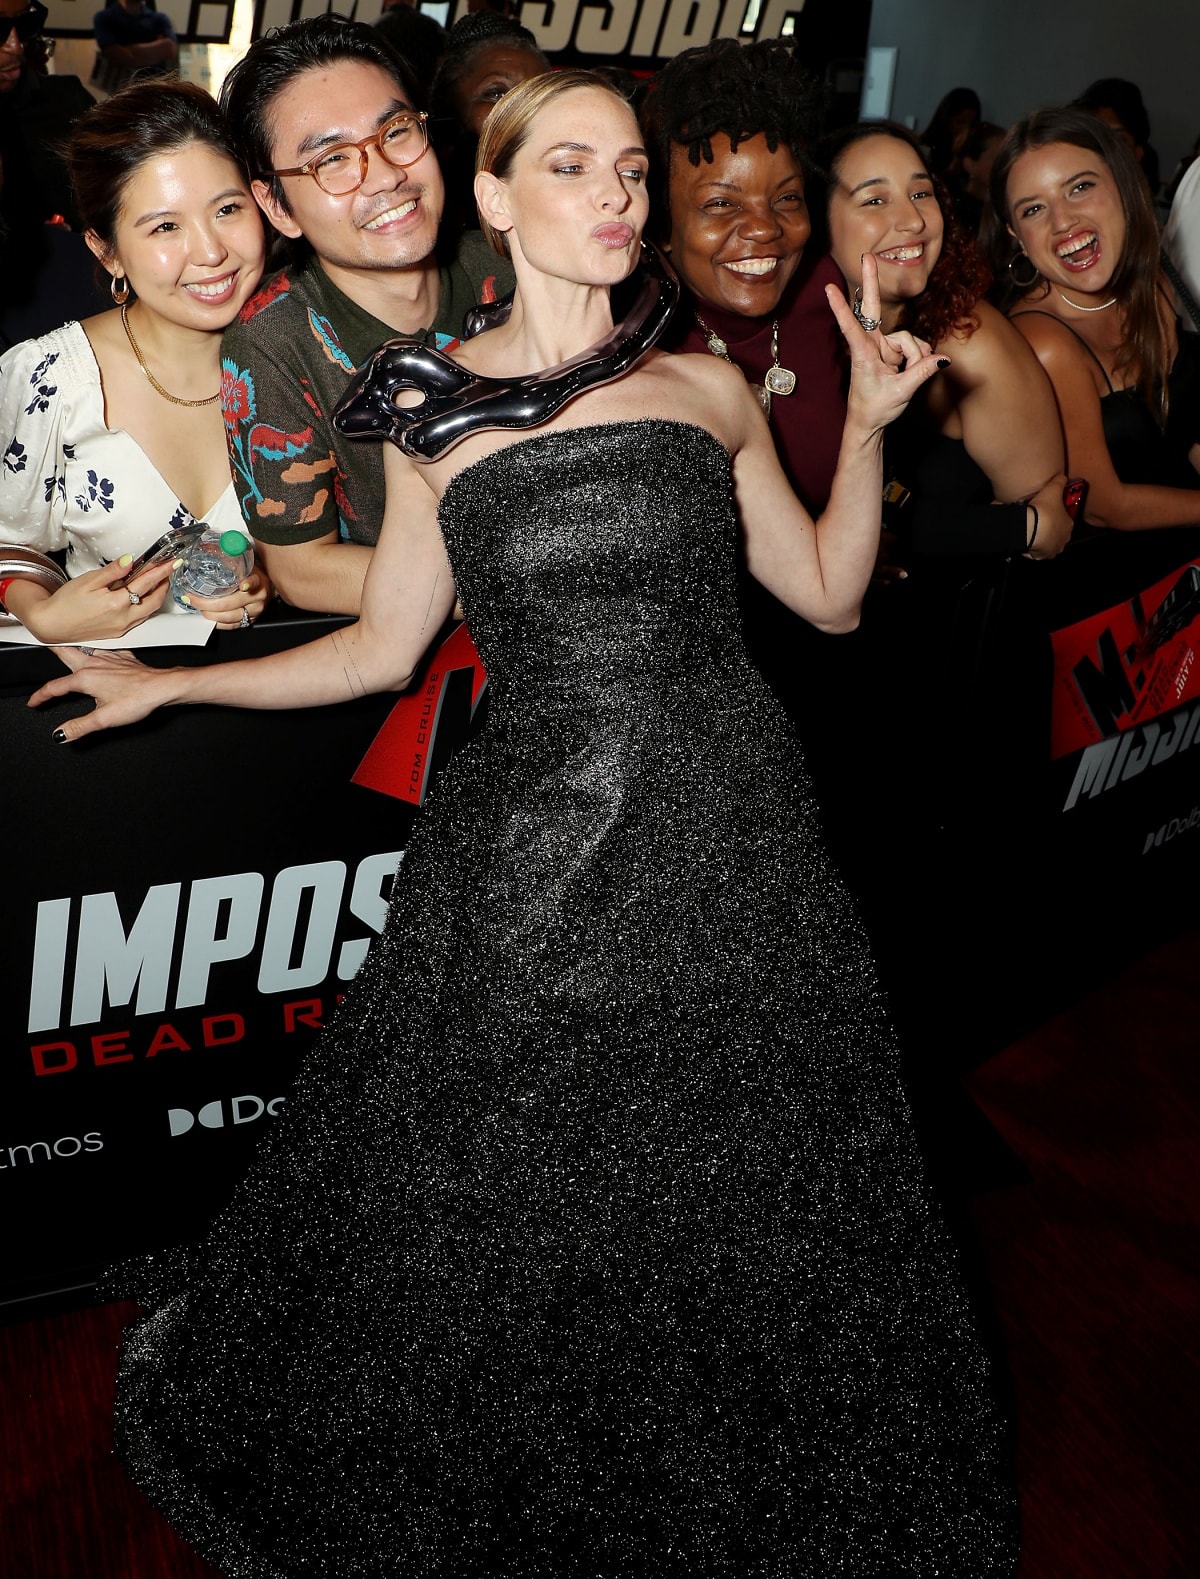 Rebecca Ferguson posing for photographs with fans at the New York premiere of Mission: Impossible – Dead Reckoning Part One